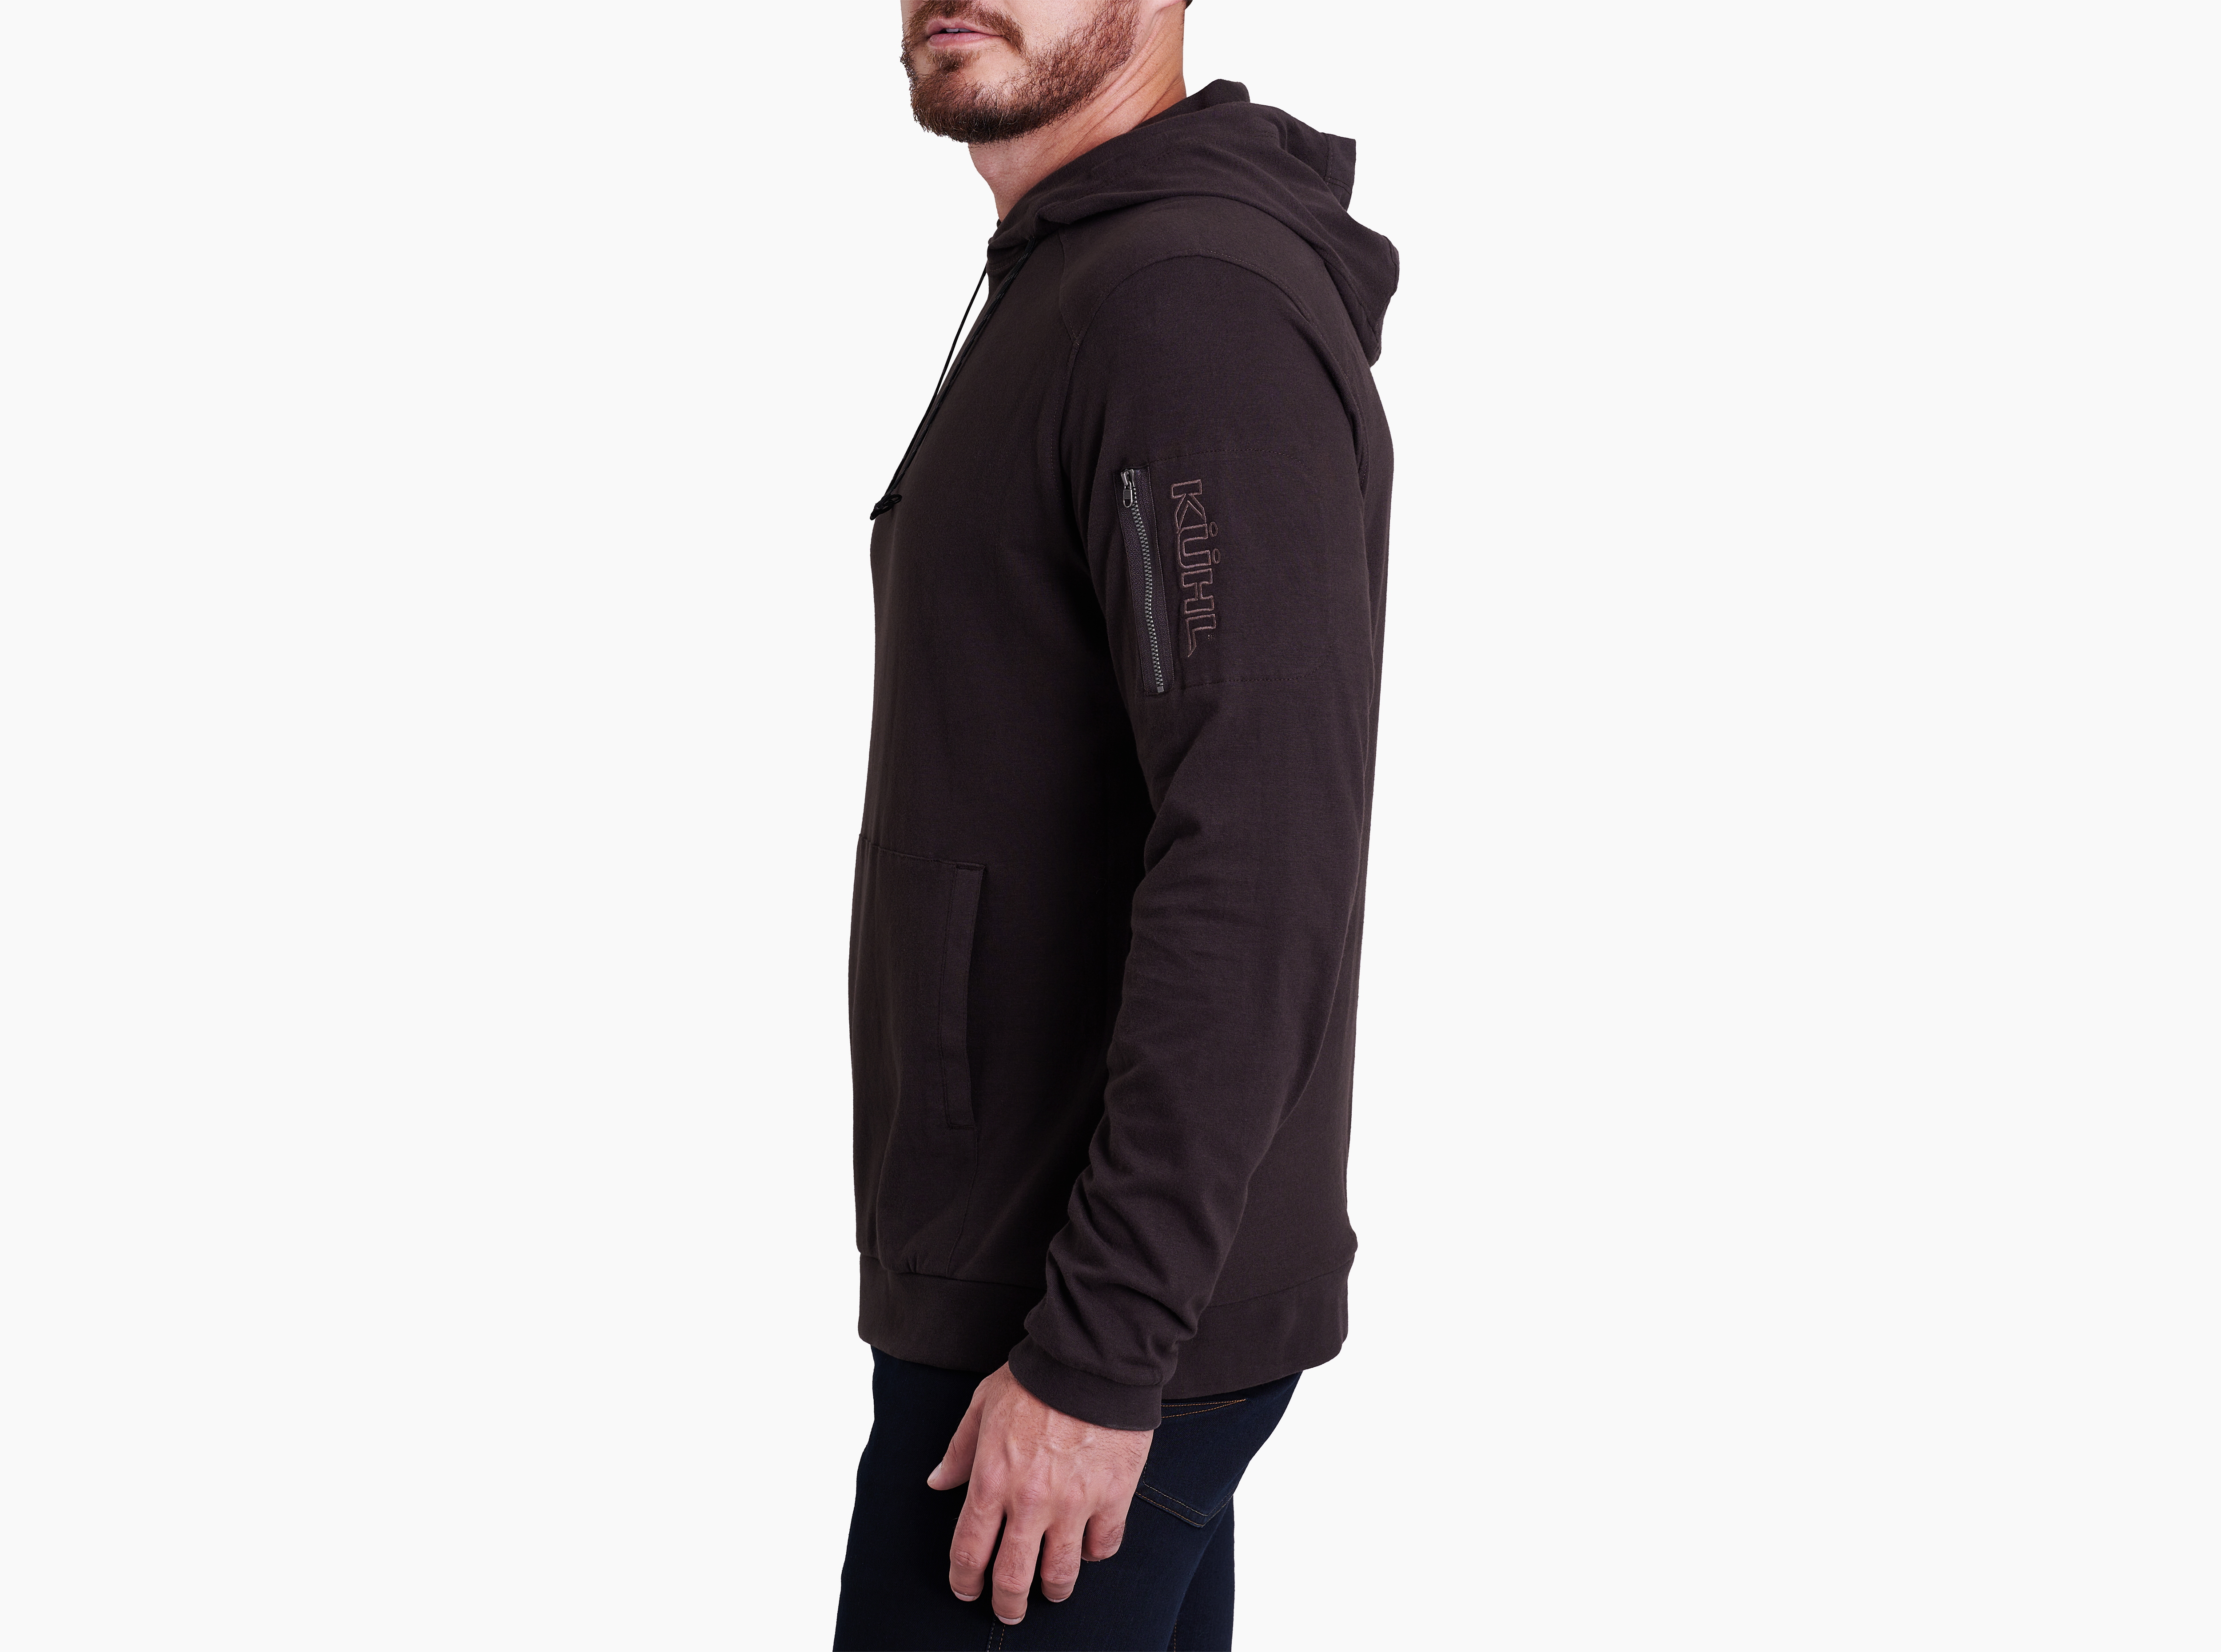 The Ultimate KÜHL The One Men's Hoody Complete Review